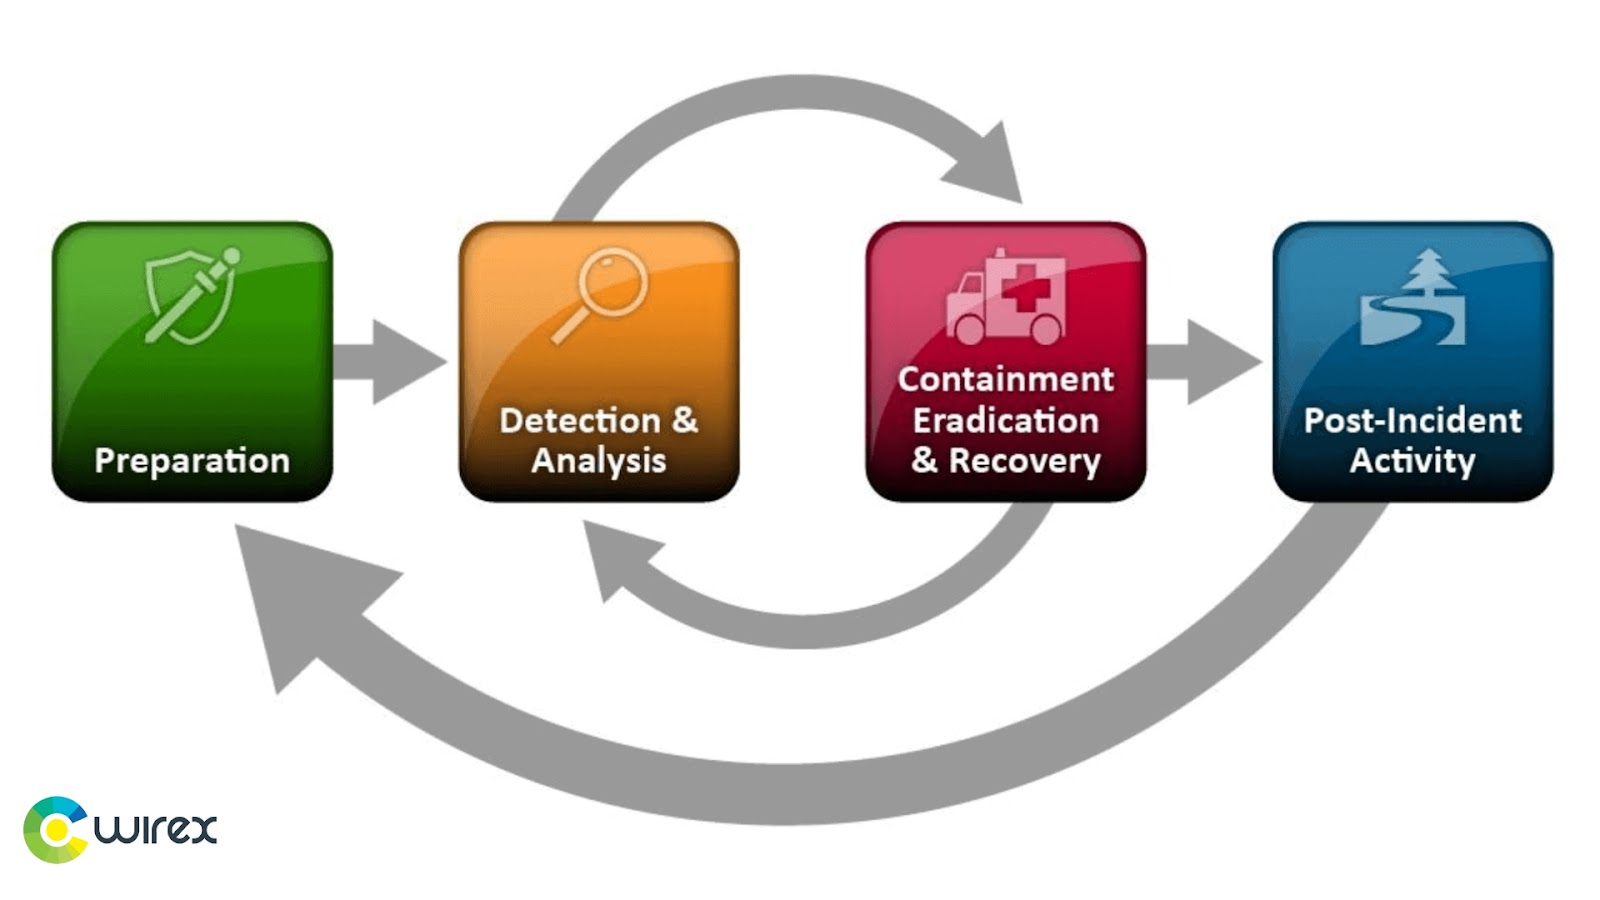 NIST Response Lifecycle